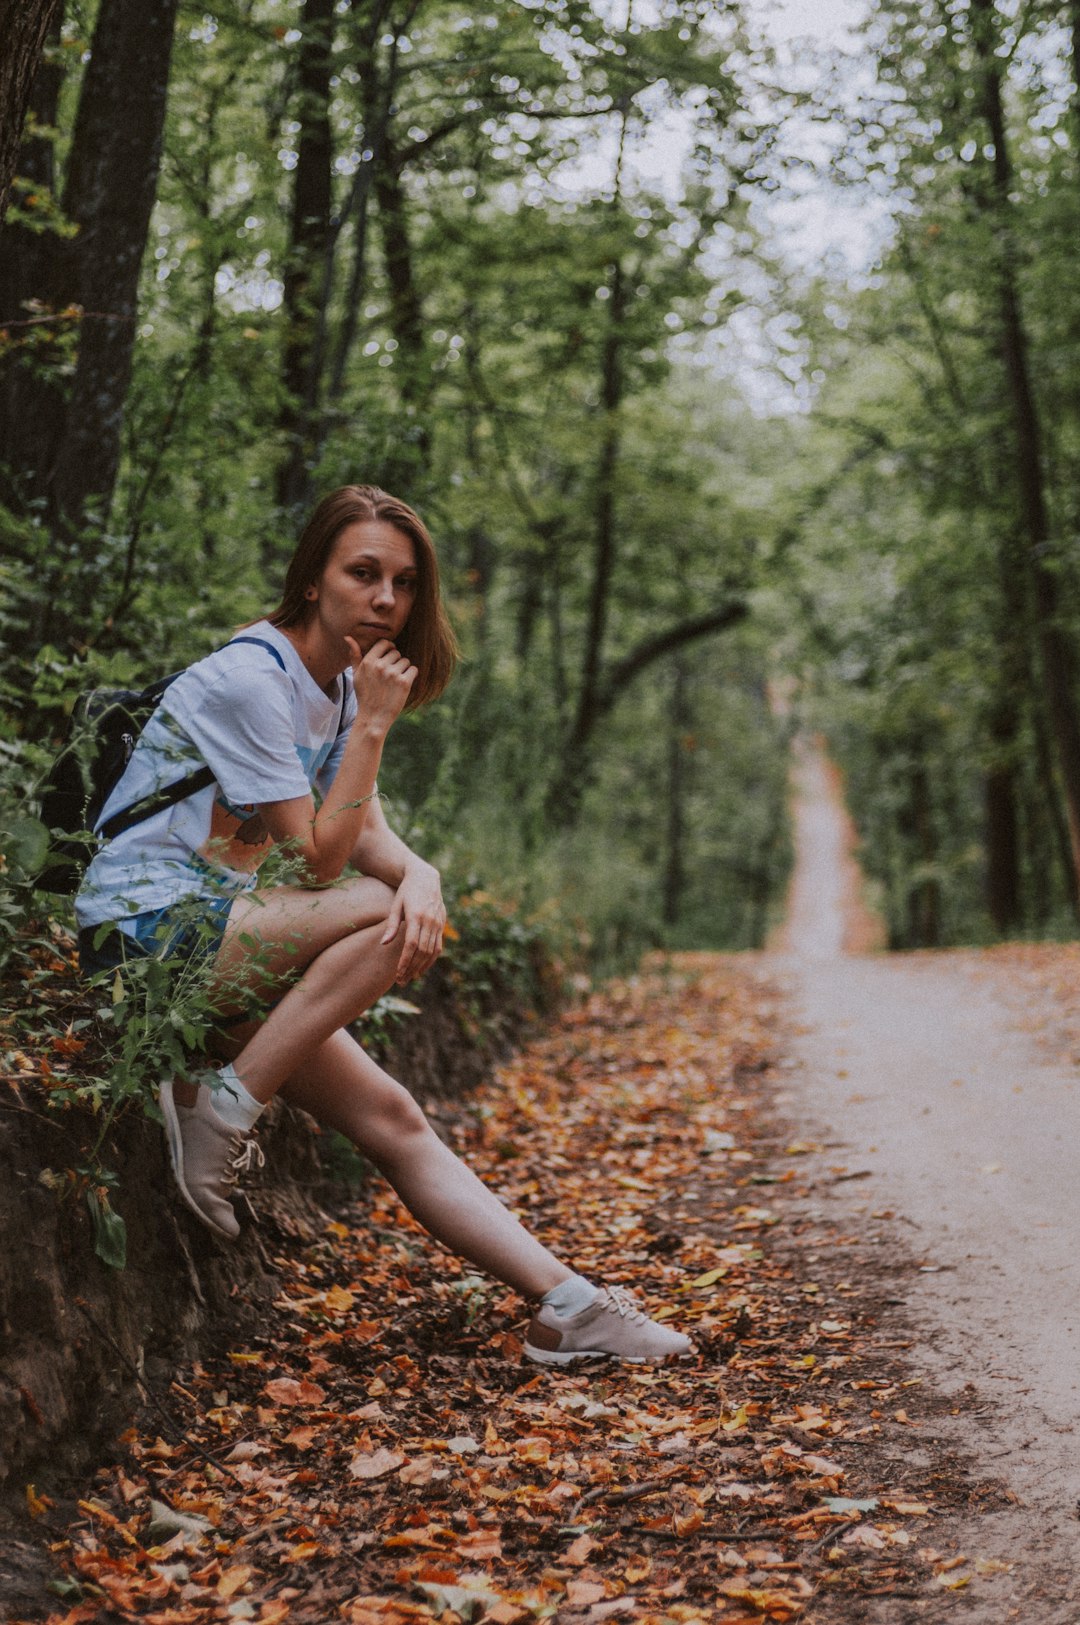 woman in white shirt sitting on brown dried leaves on pathway during daytime